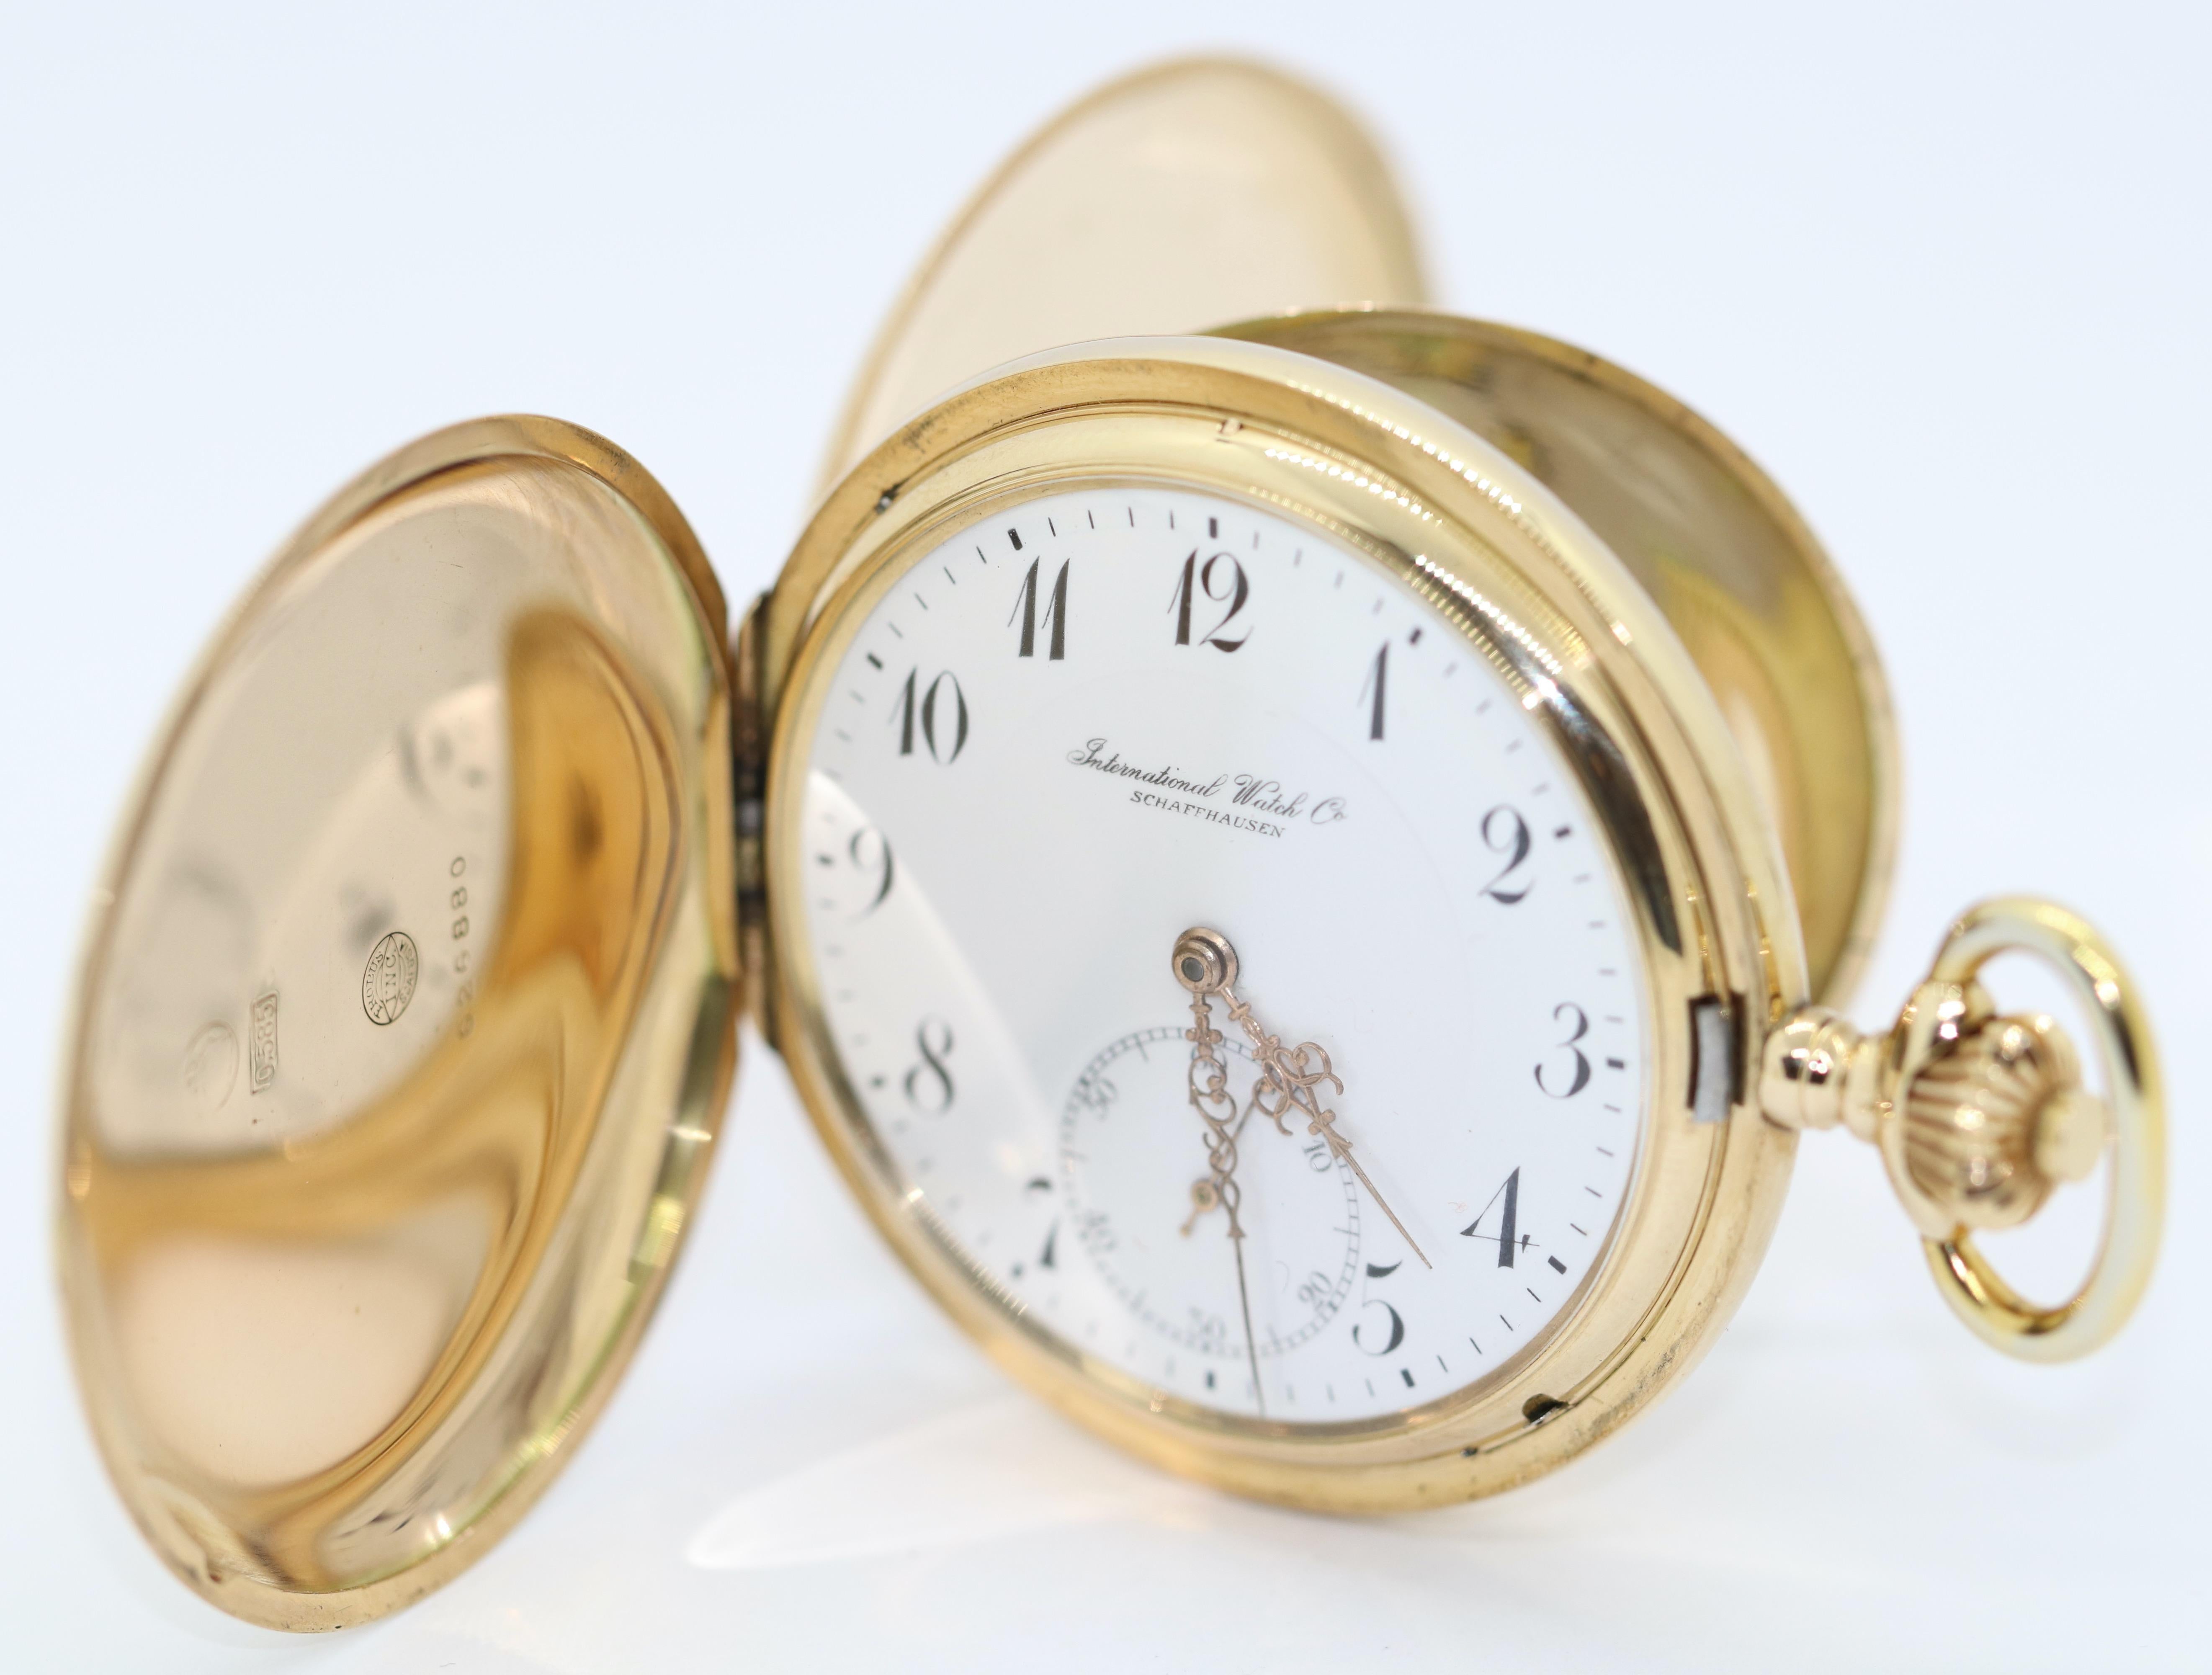 IWC Pocket Watch Hunter 14 Karat Gold.

Pocket watch can be wound and works.

Including certificate of authenticity.